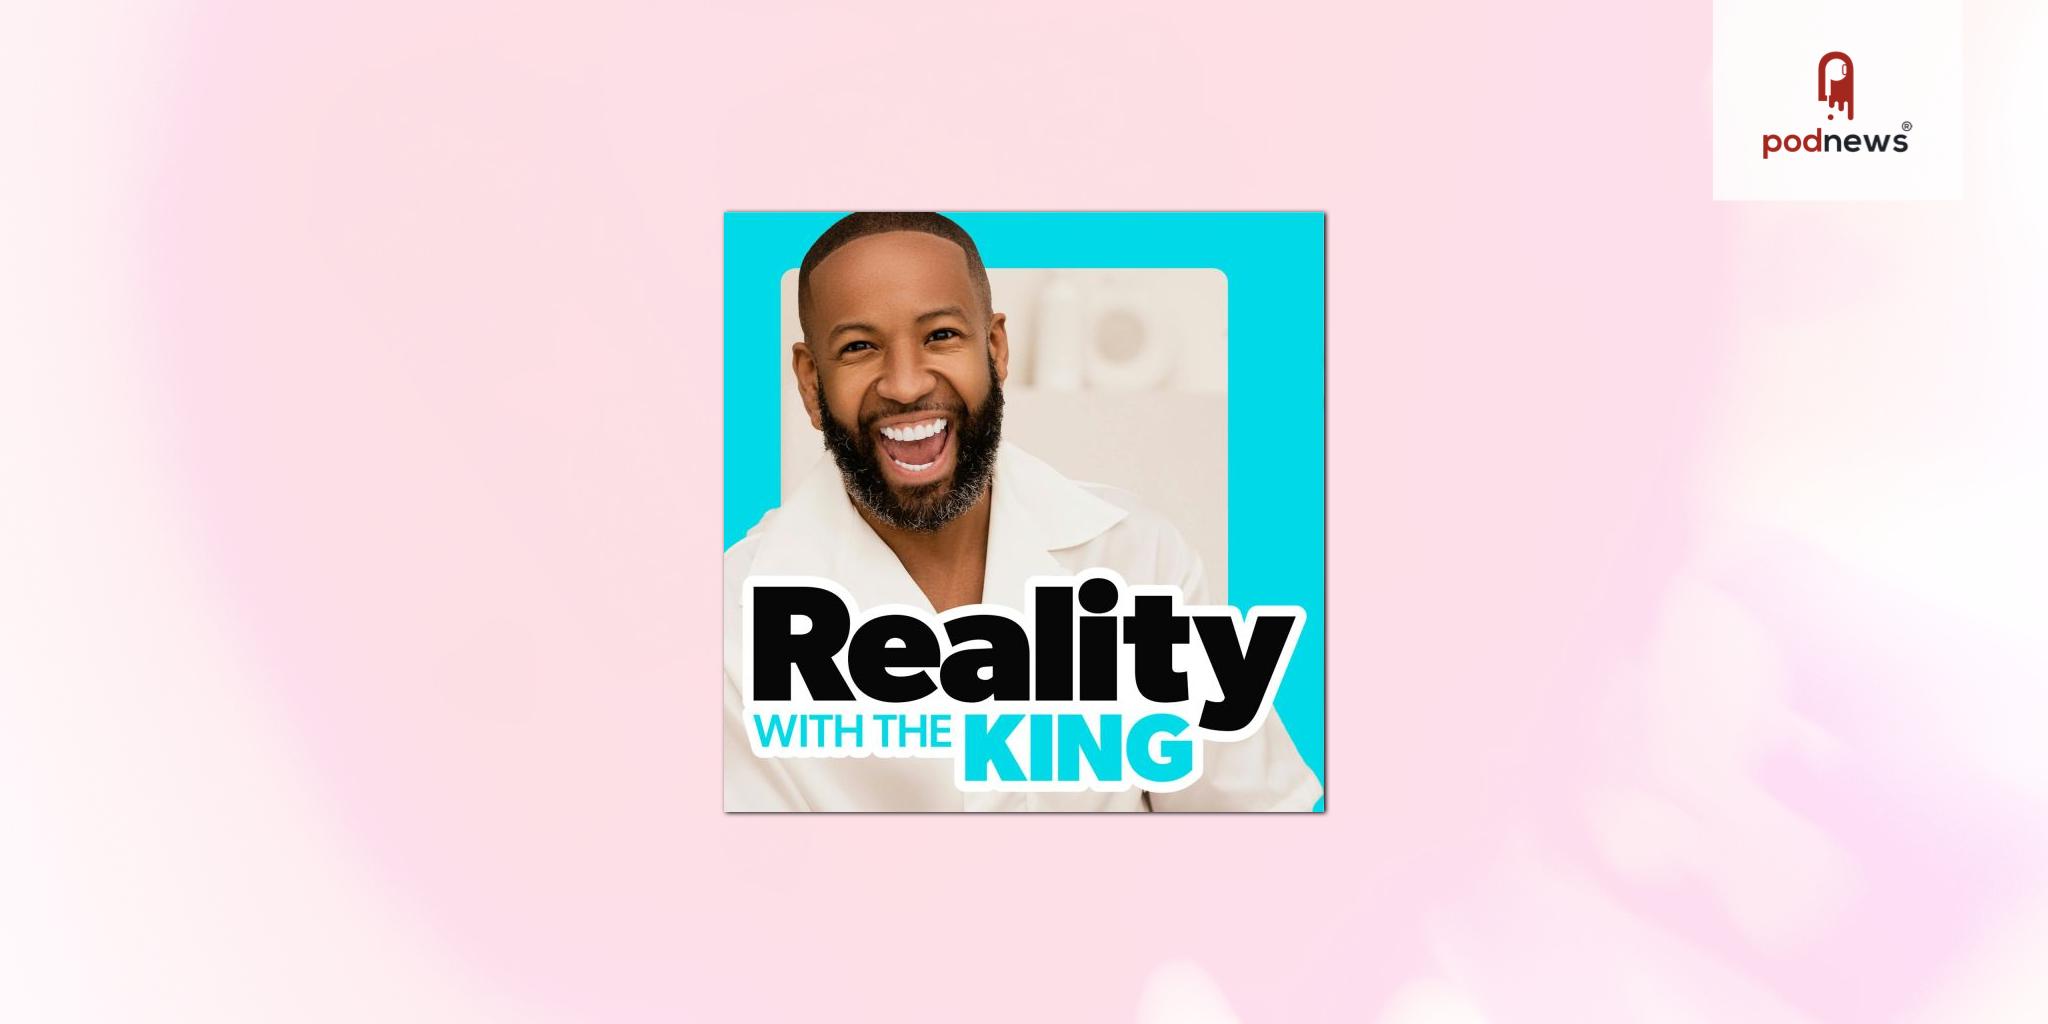 SiriusXM's Stitcher signs Carlos King to launch original podcast series Reality with the King on More Sauce